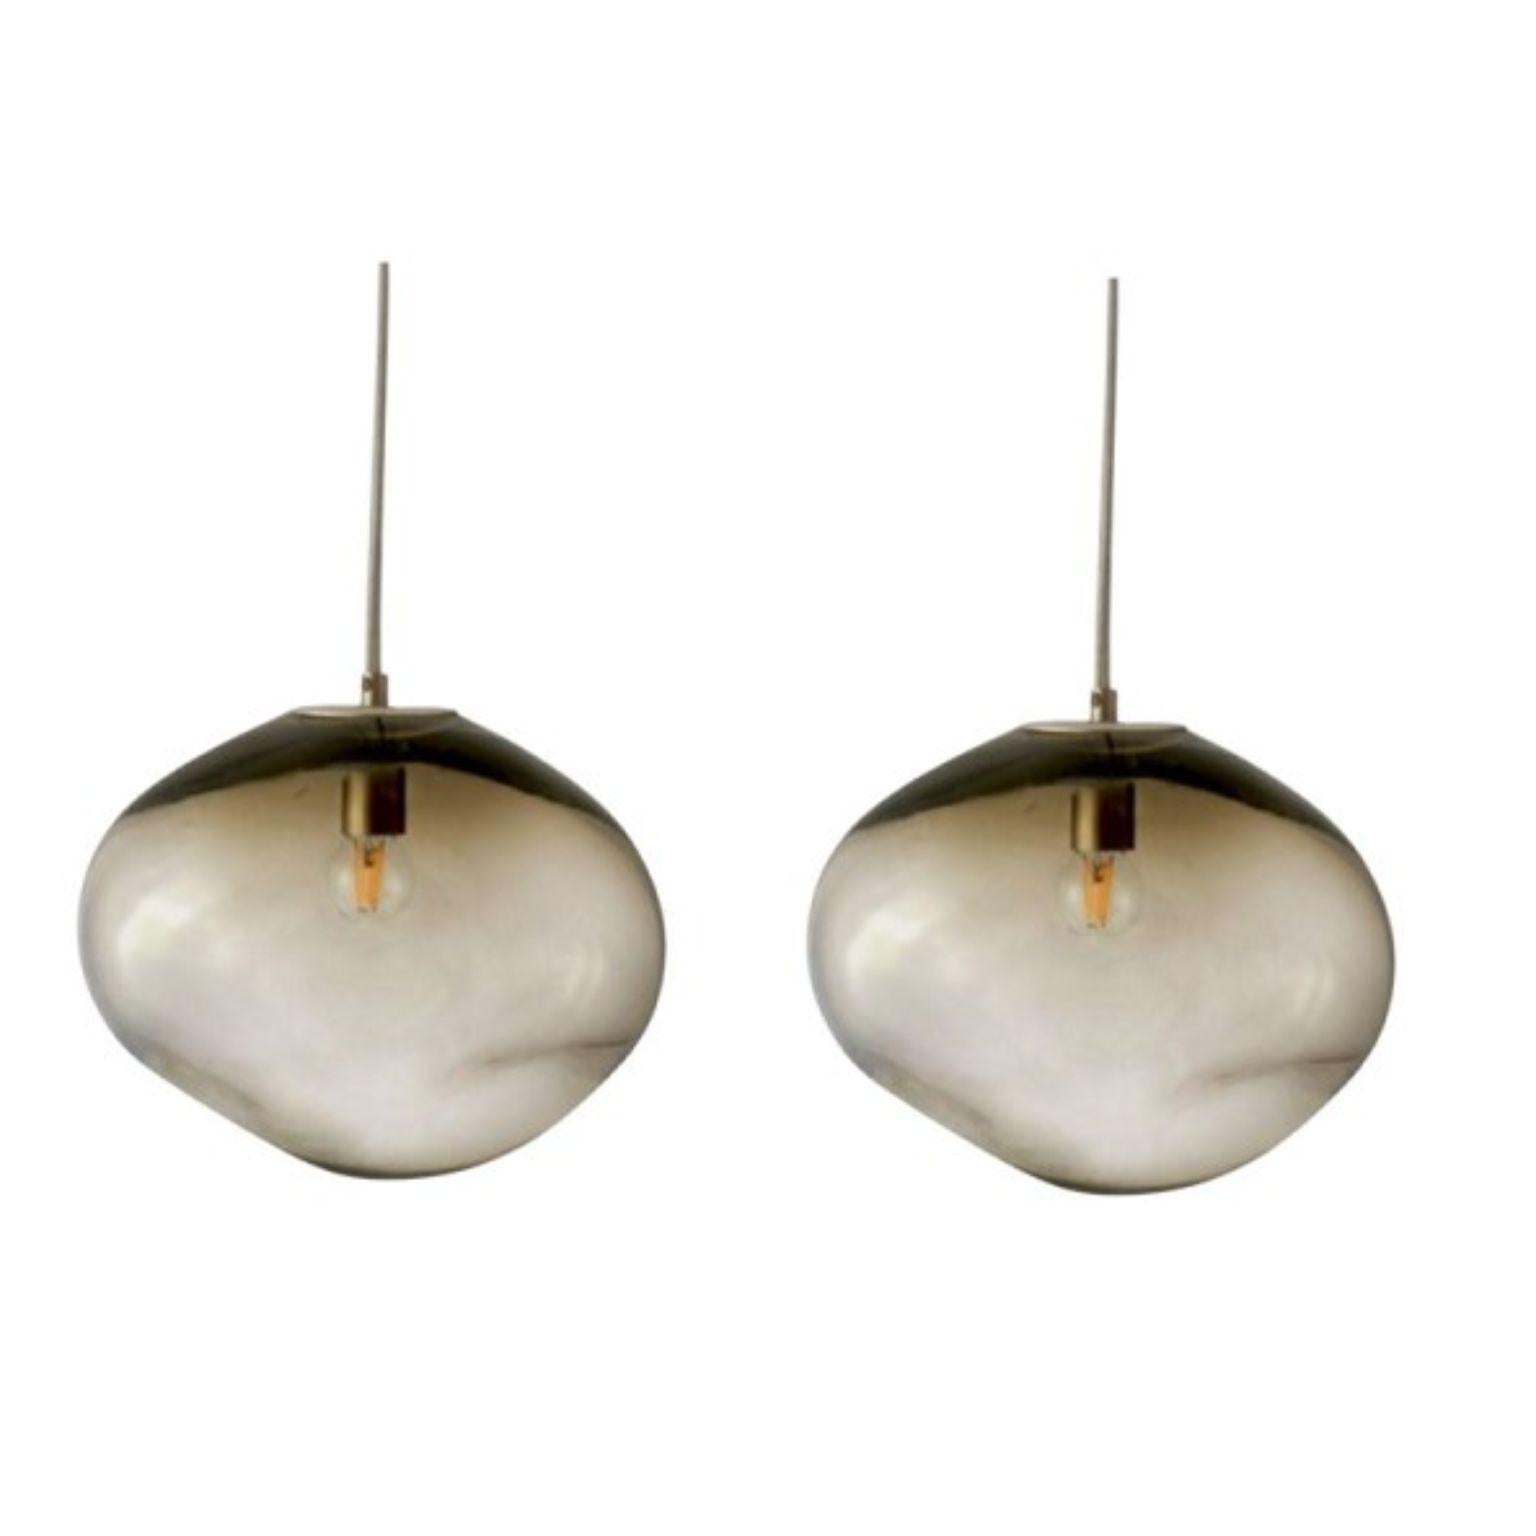 Set of 2 Haumea amorph silver smoke M pendants by Eloa.
No UL listed 
Material: glass, steel, silver, LED bulb.
Dimensions: D 30 x W 32 x H 27 cm.
Also available in different colours and dimensions.

All our lamps can be wired according to each